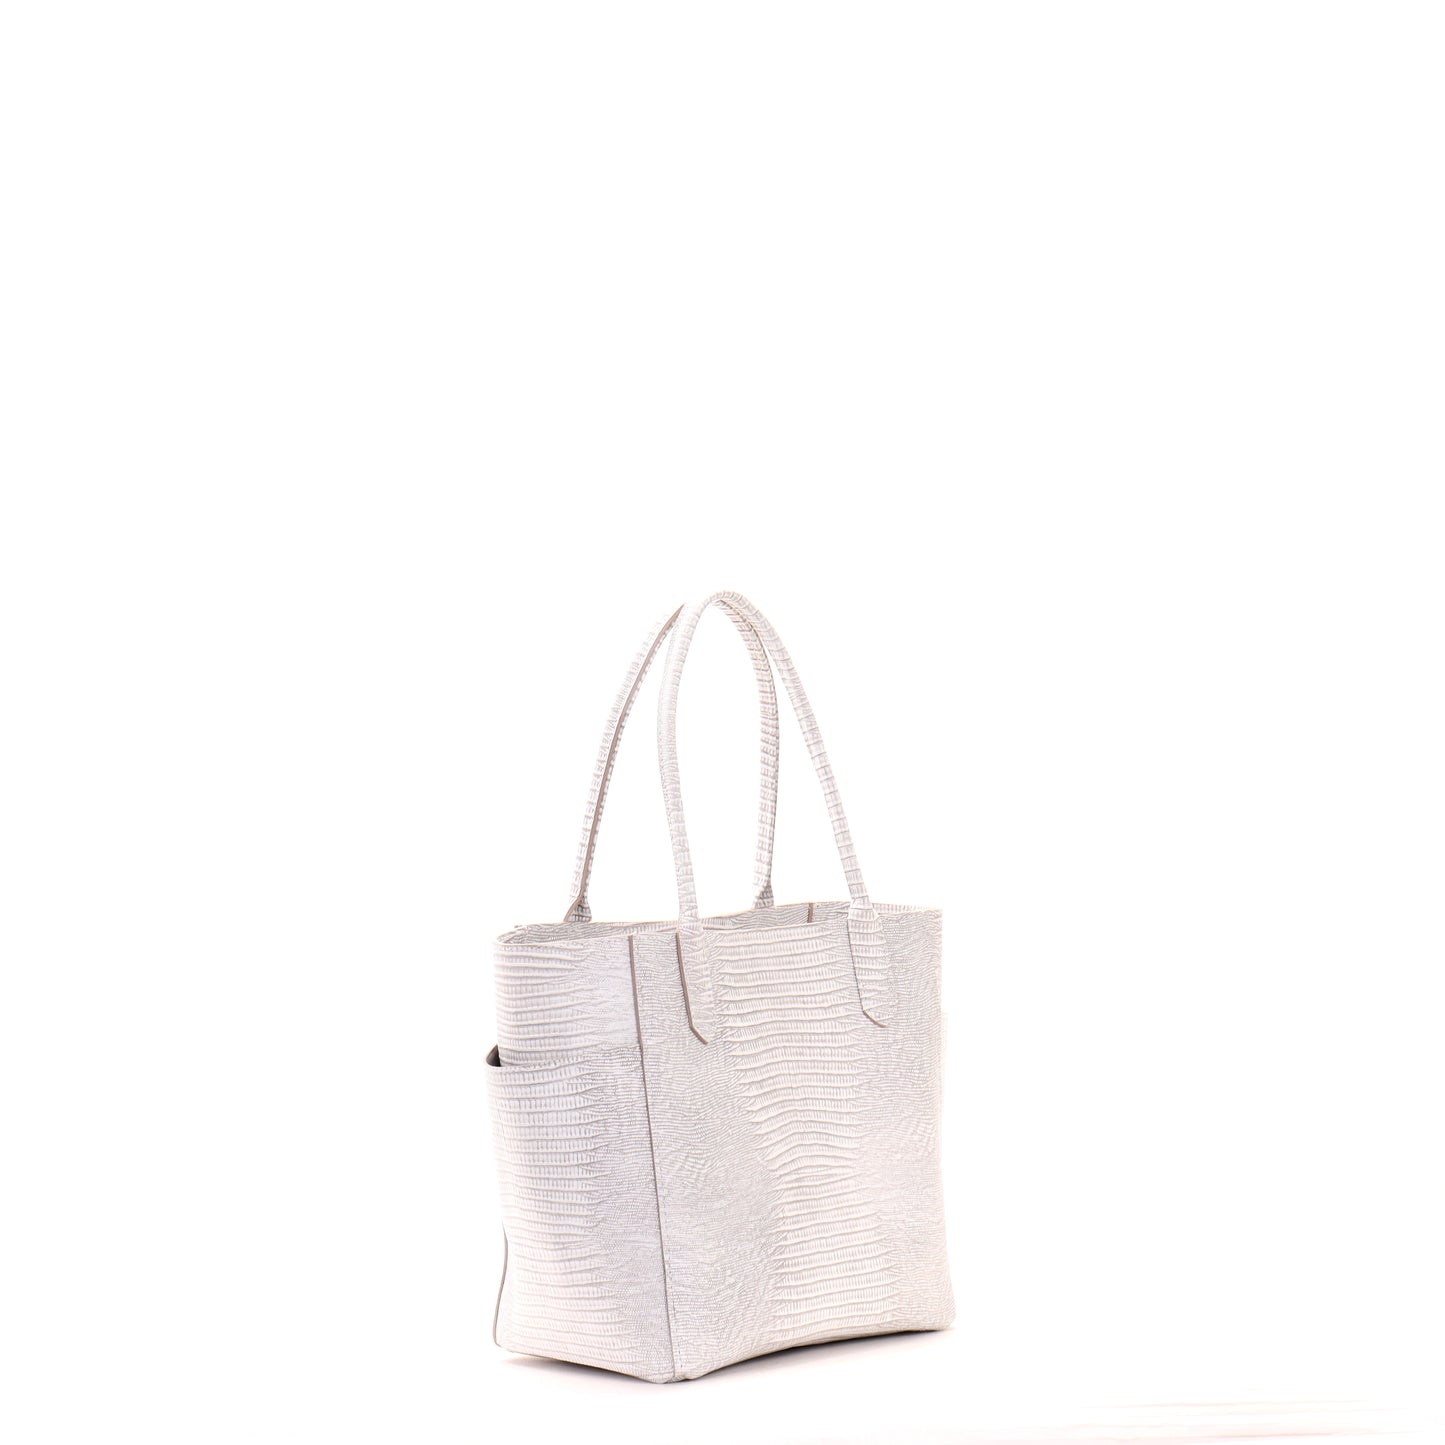 SMALL POCKET TOTE ANTIQUE WHITE EMBOSSED LIZARD